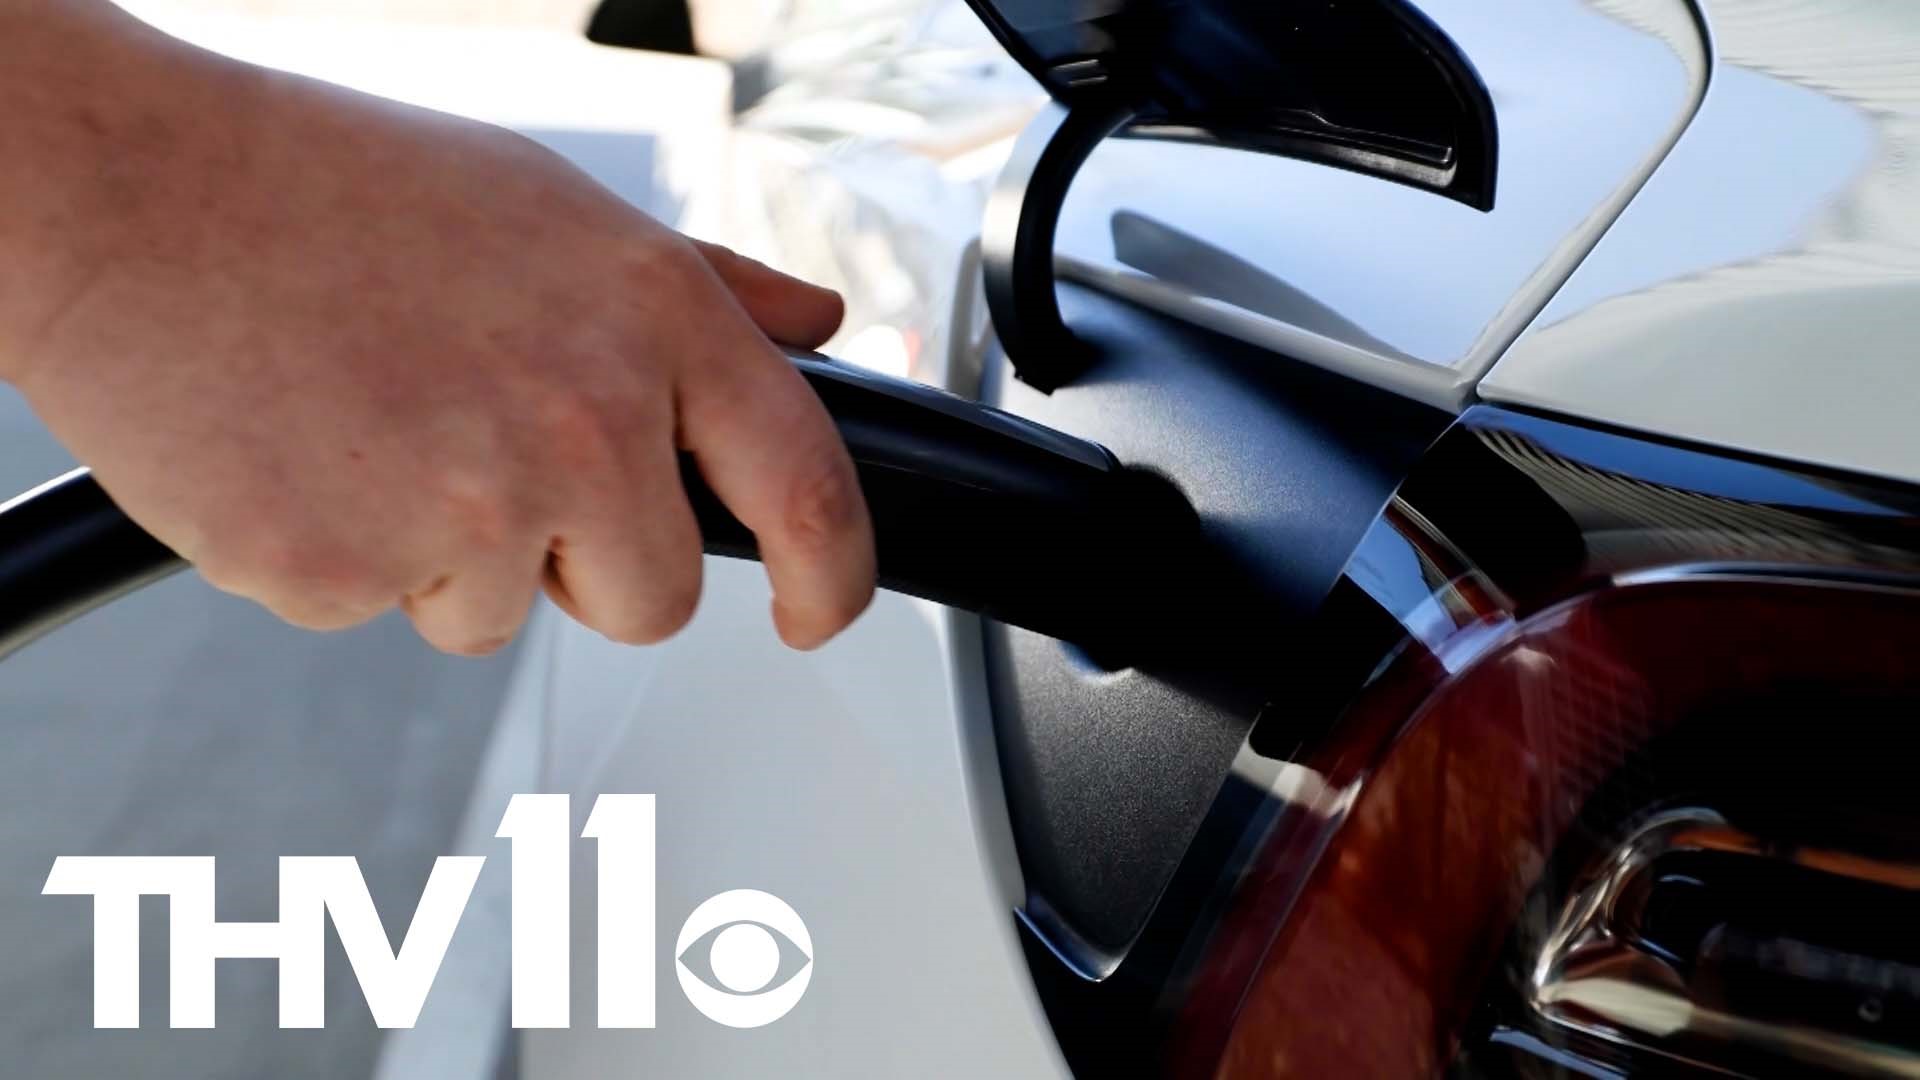 Electric vehicle registrations in Arkansas have increased by 43% in the last five months according to experts.